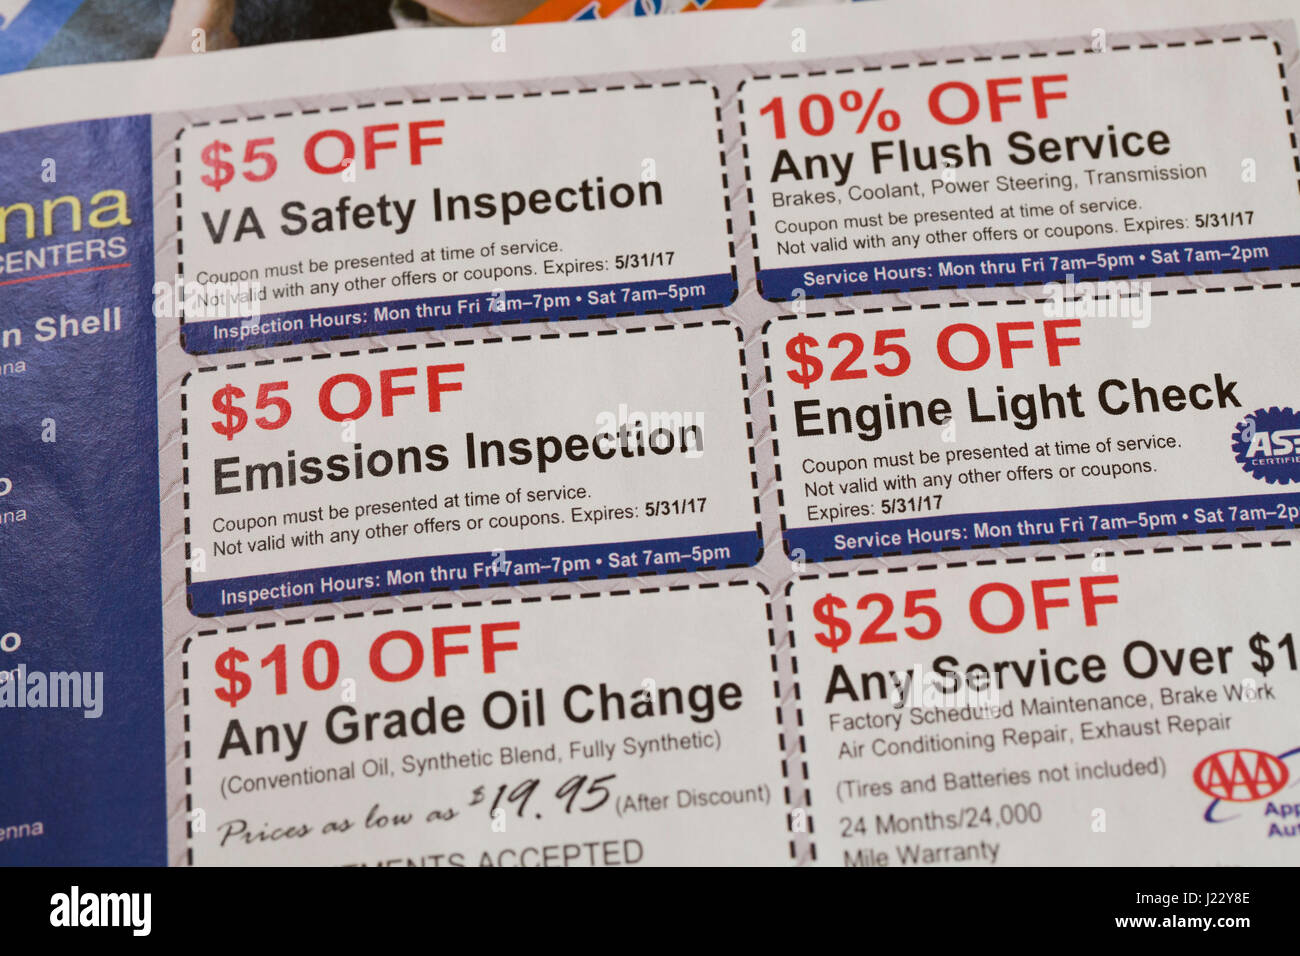 Auto maintenance et réparation coupons in weekly mailer ad - USA Banque D'Images